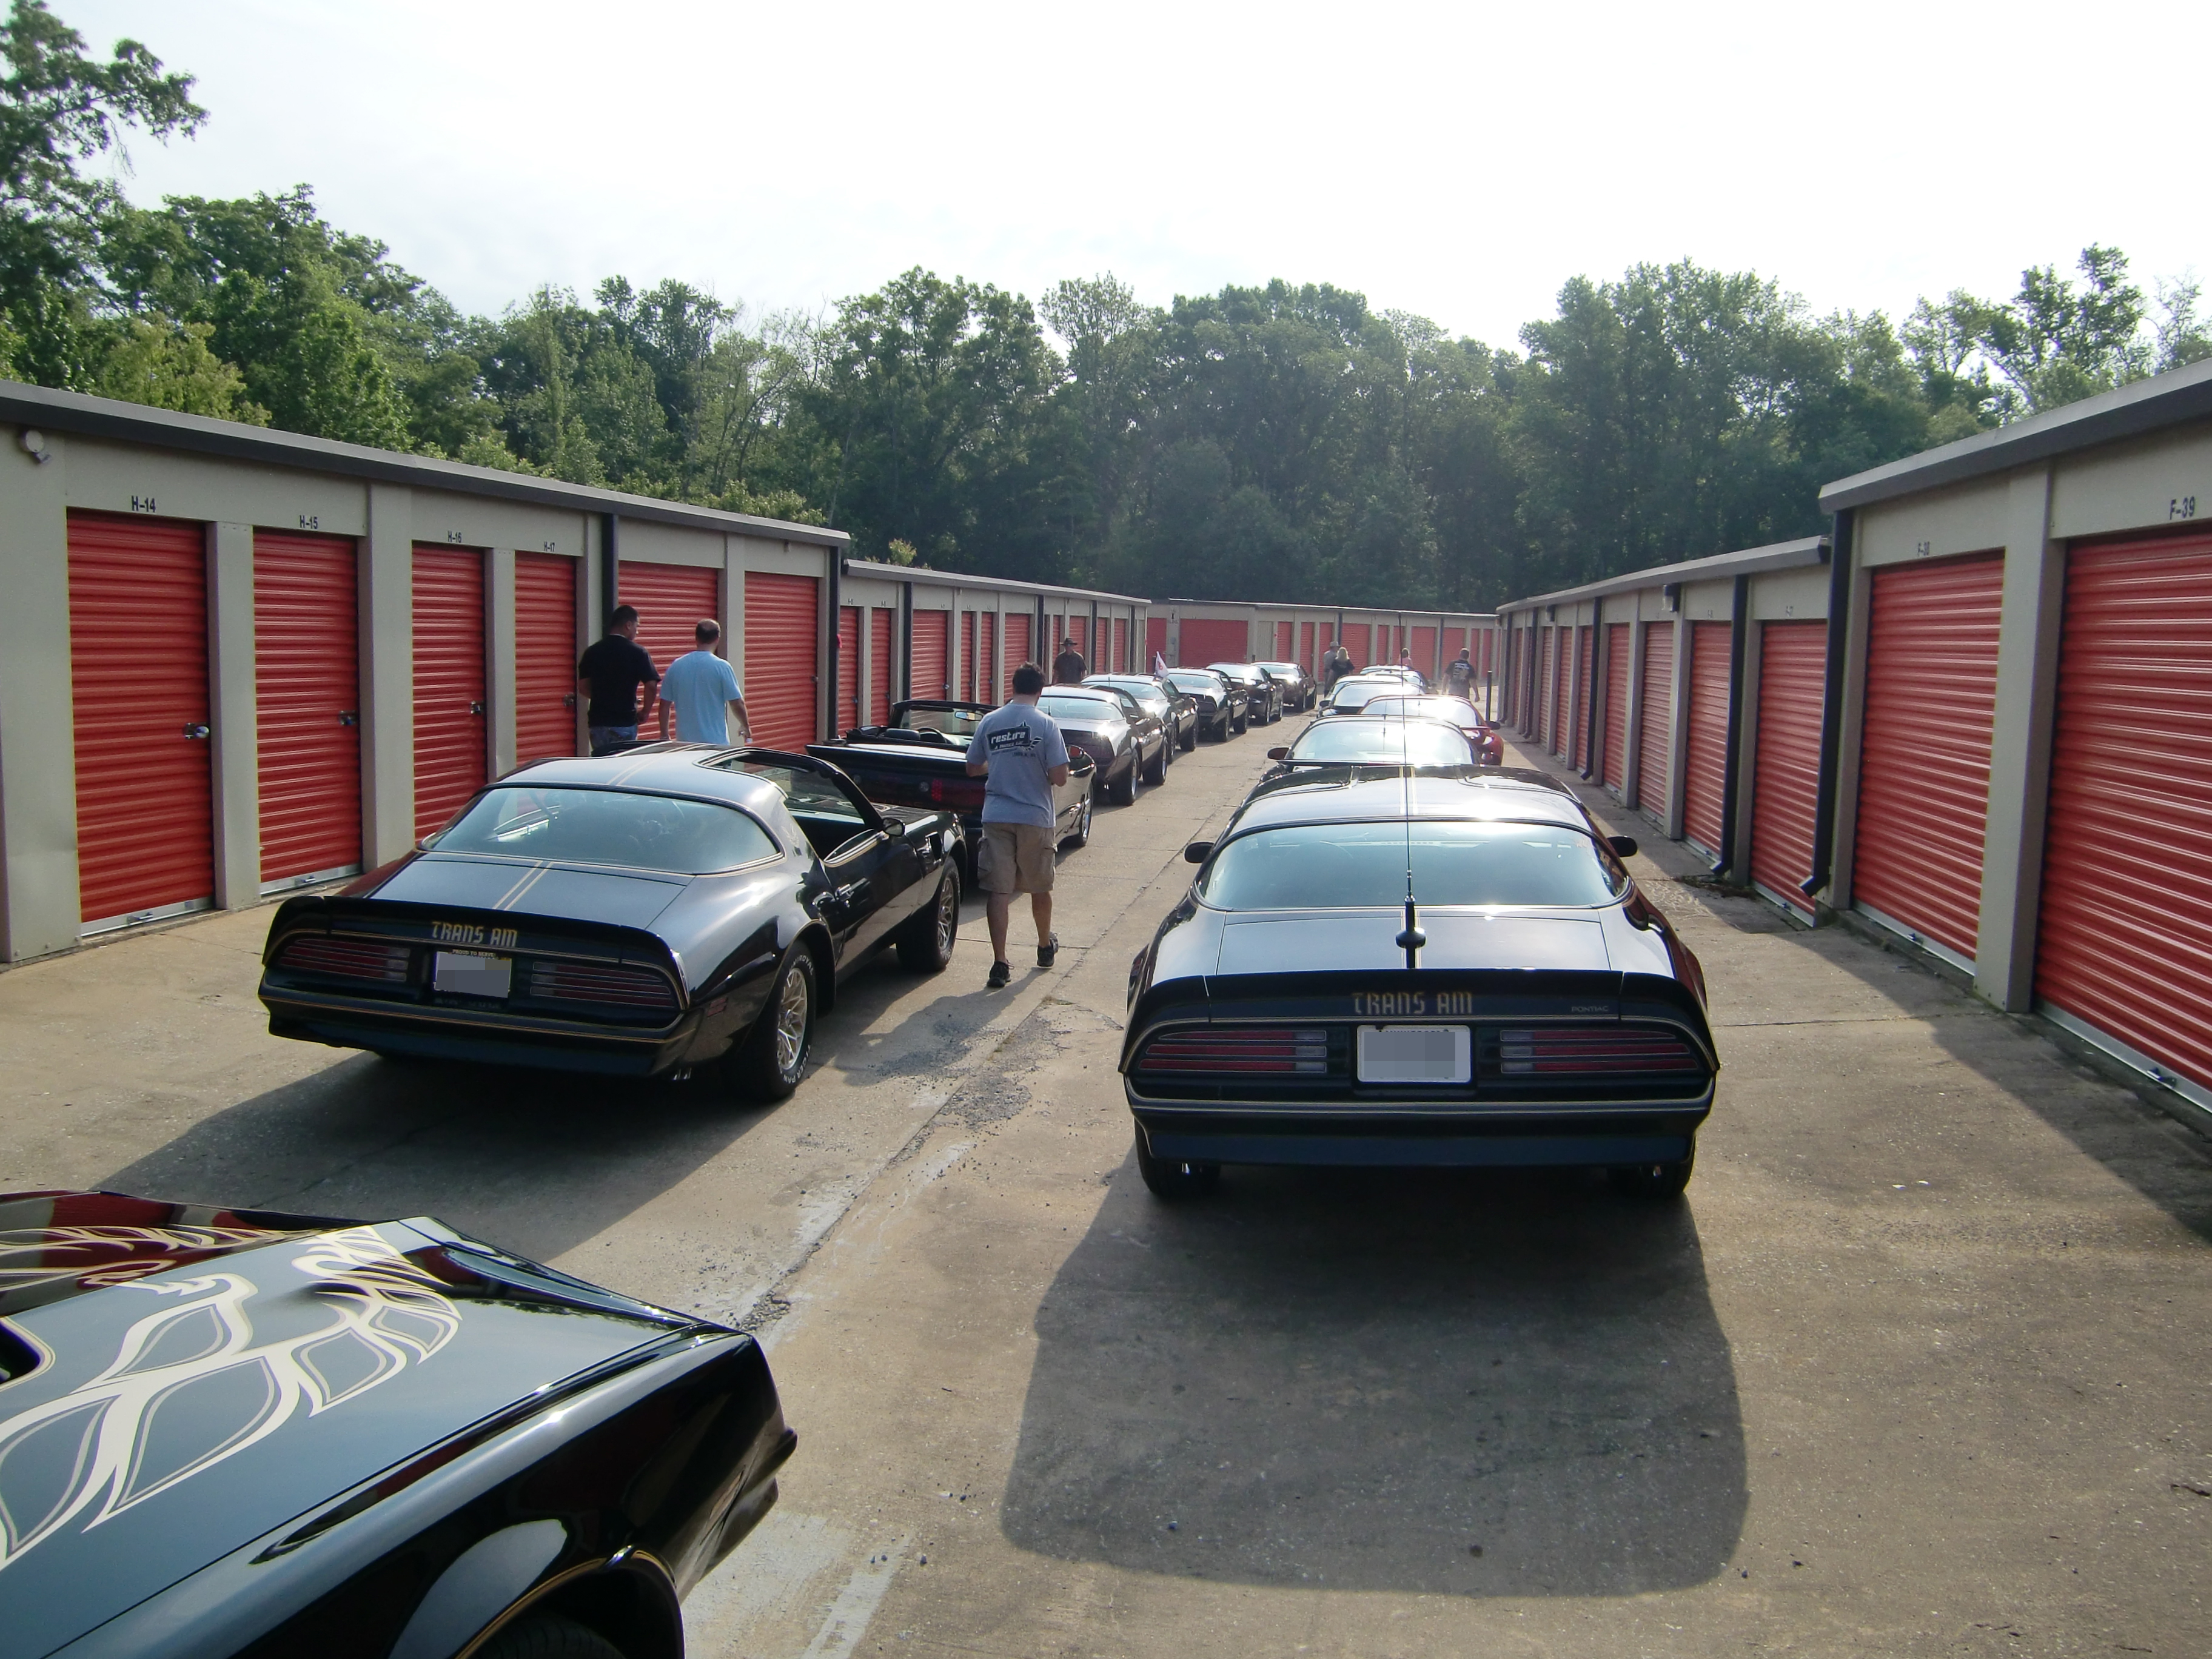 The Bandit Run cars parked in a storage lot